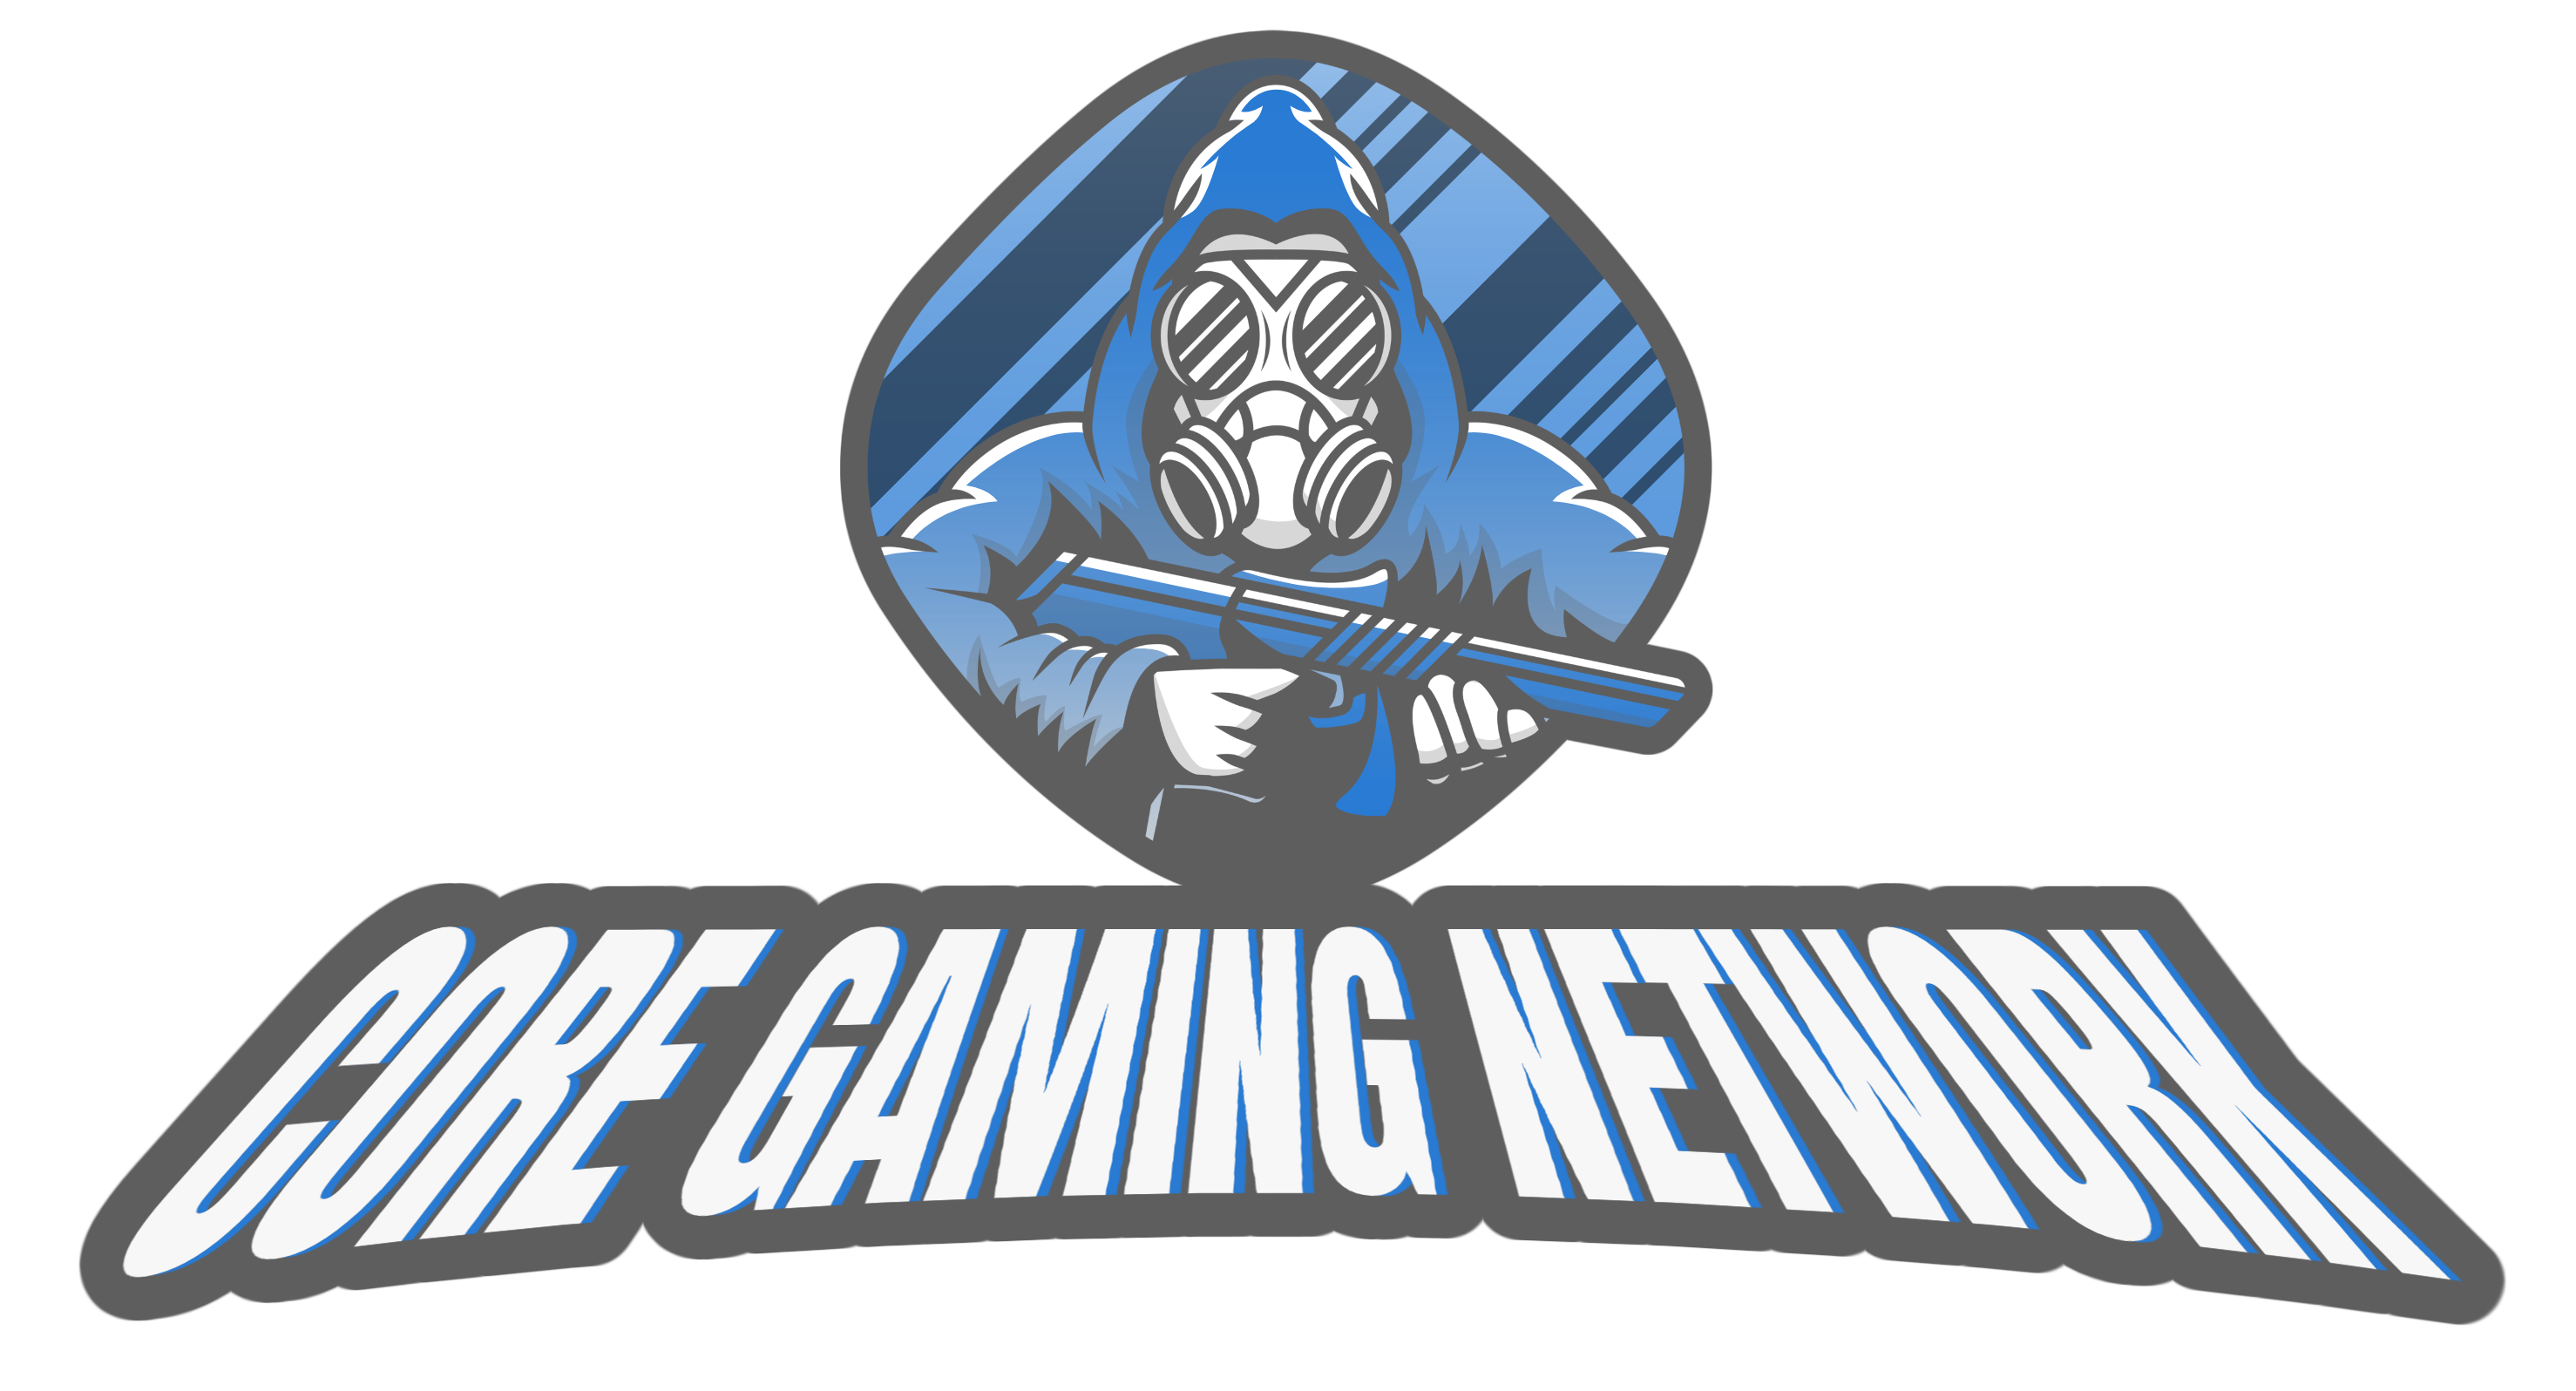 Core Gaming Network